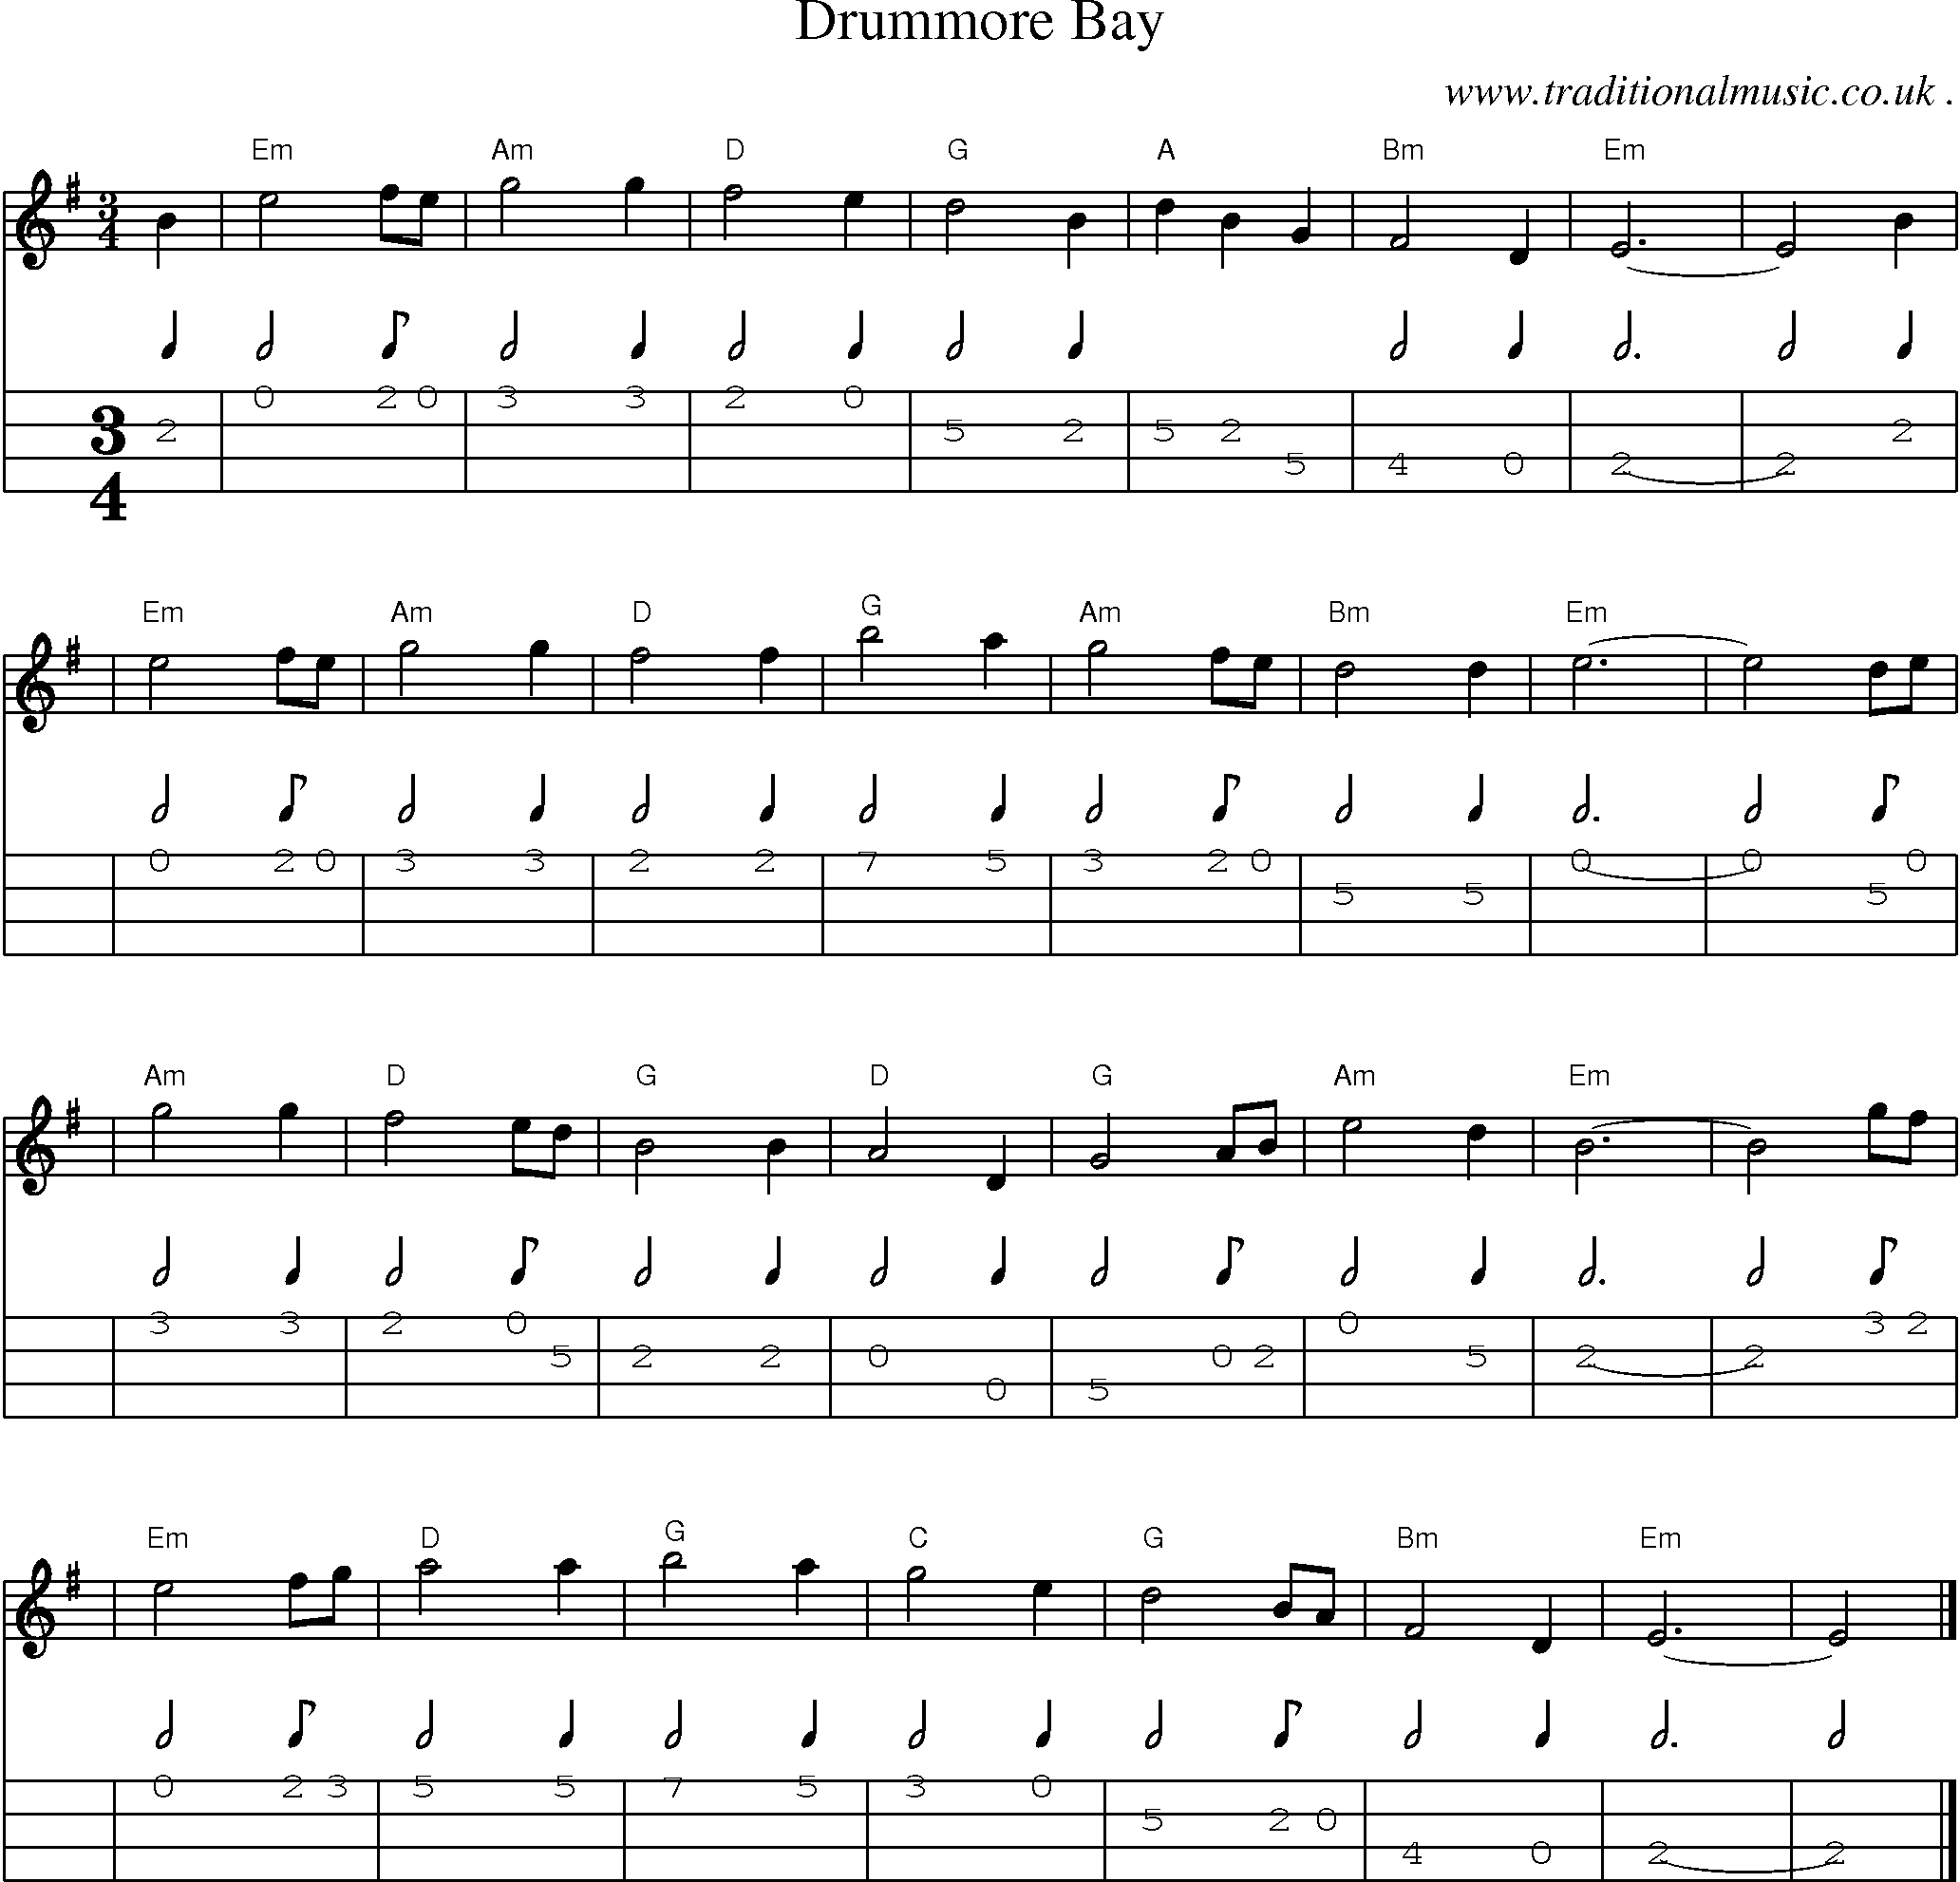 Sheet-music  score, Chords and Mandolin Tabs for Drummore Bay